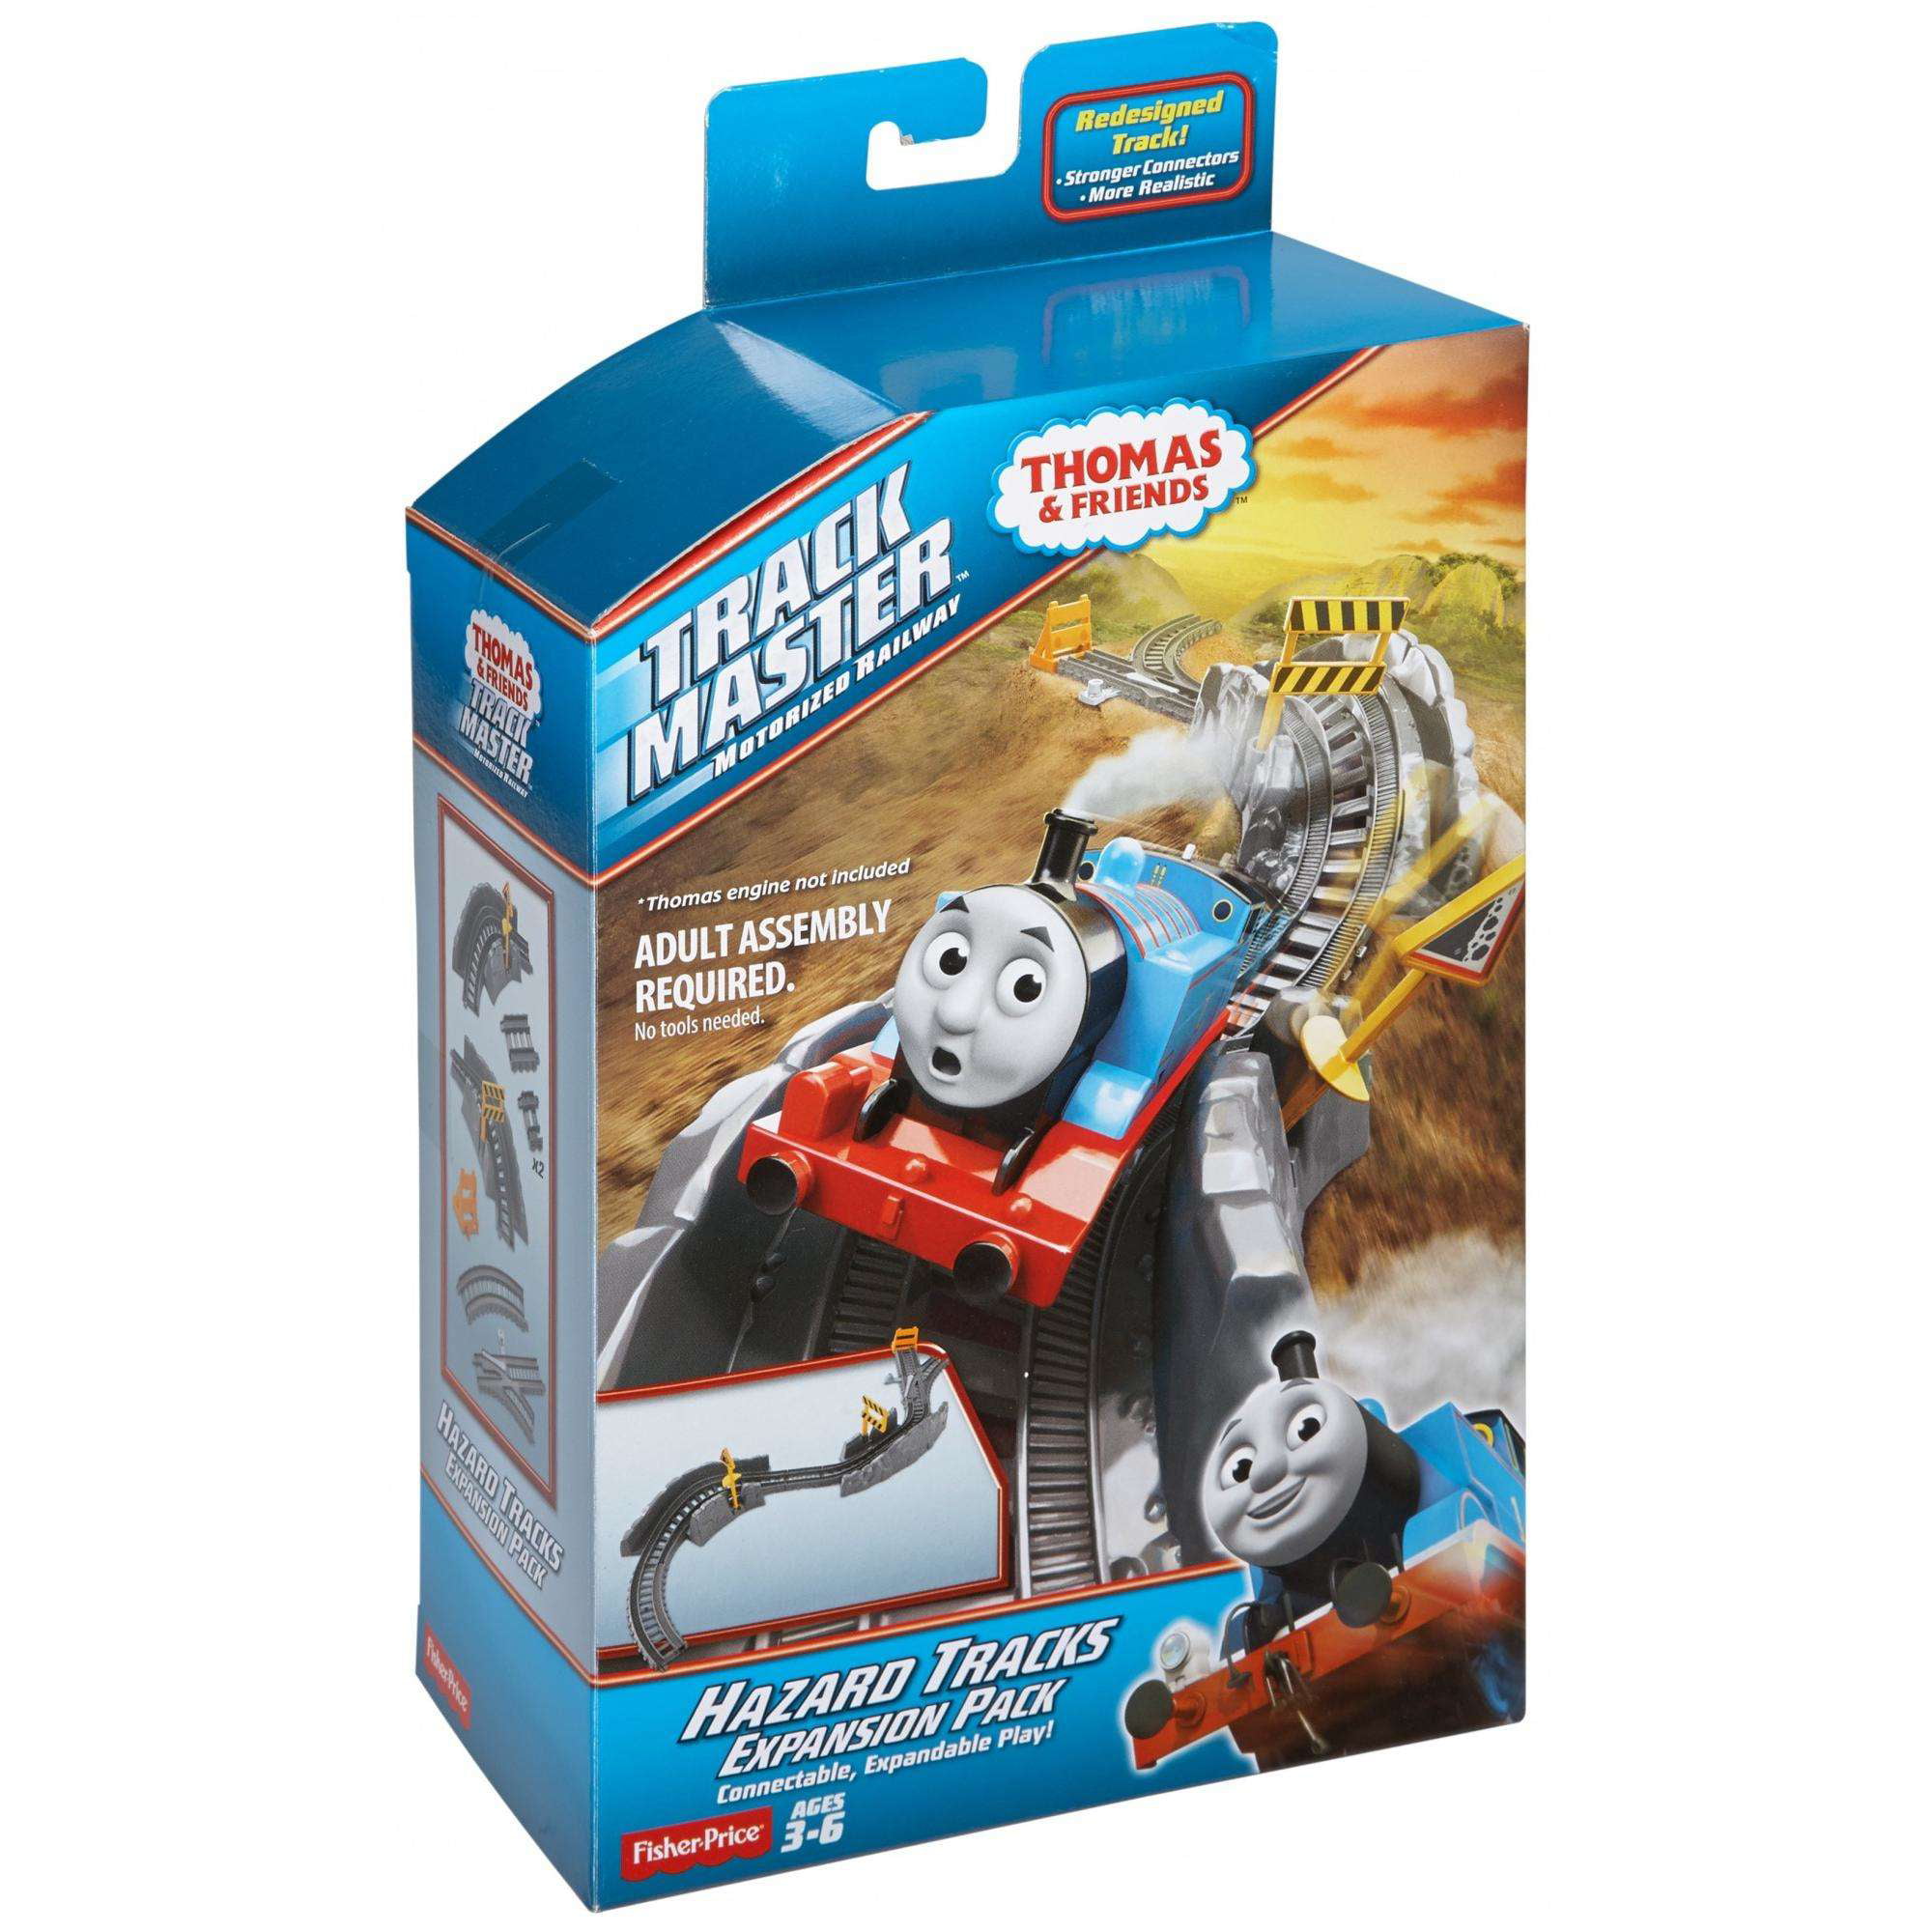 Tunnel Expansion Pack Thomas & Friends TrackMaster 